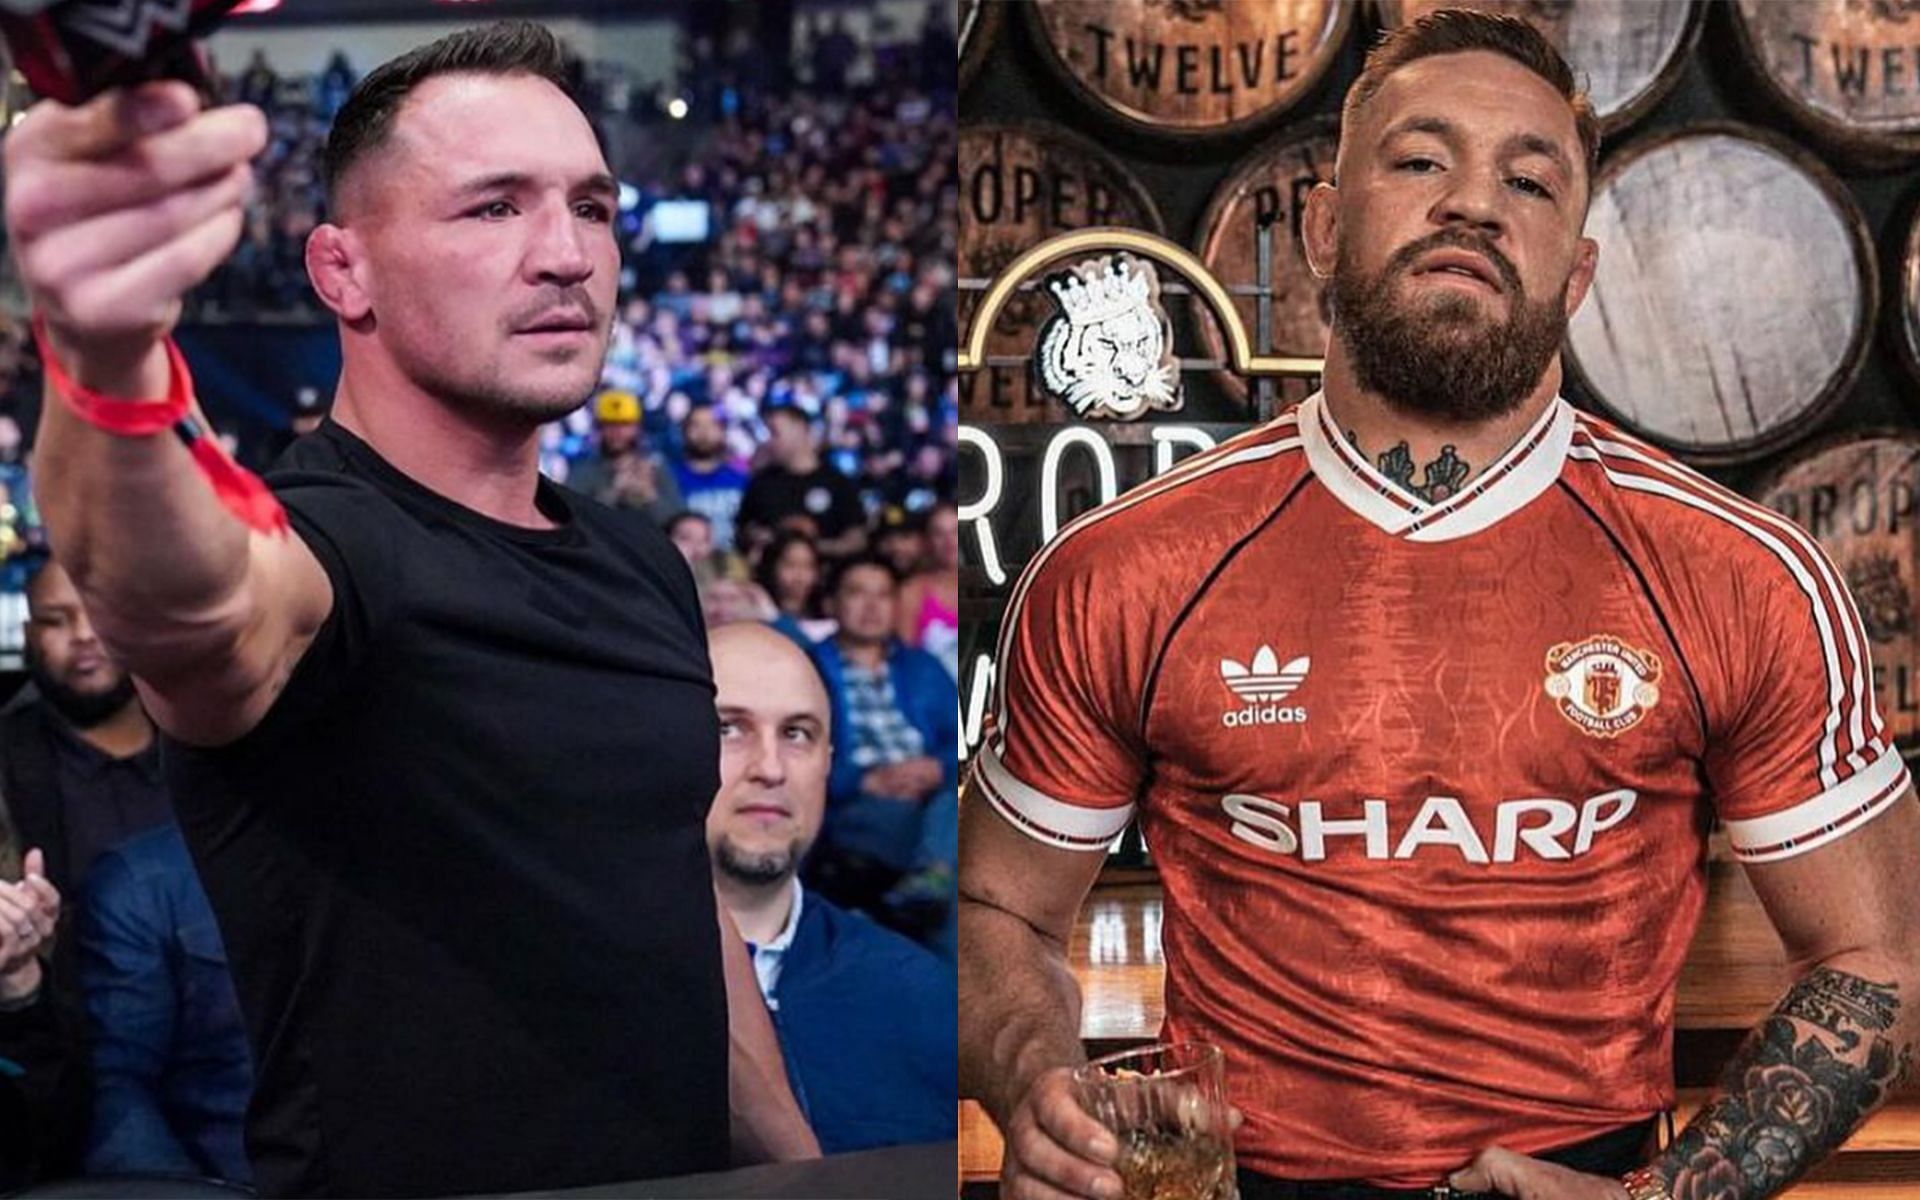 Michael Chandler (left) re-issued a knockout warning to Conor McGregor (right) (Images Courtesy: @mikechandlermma and @thenotoriousmma Instagram)